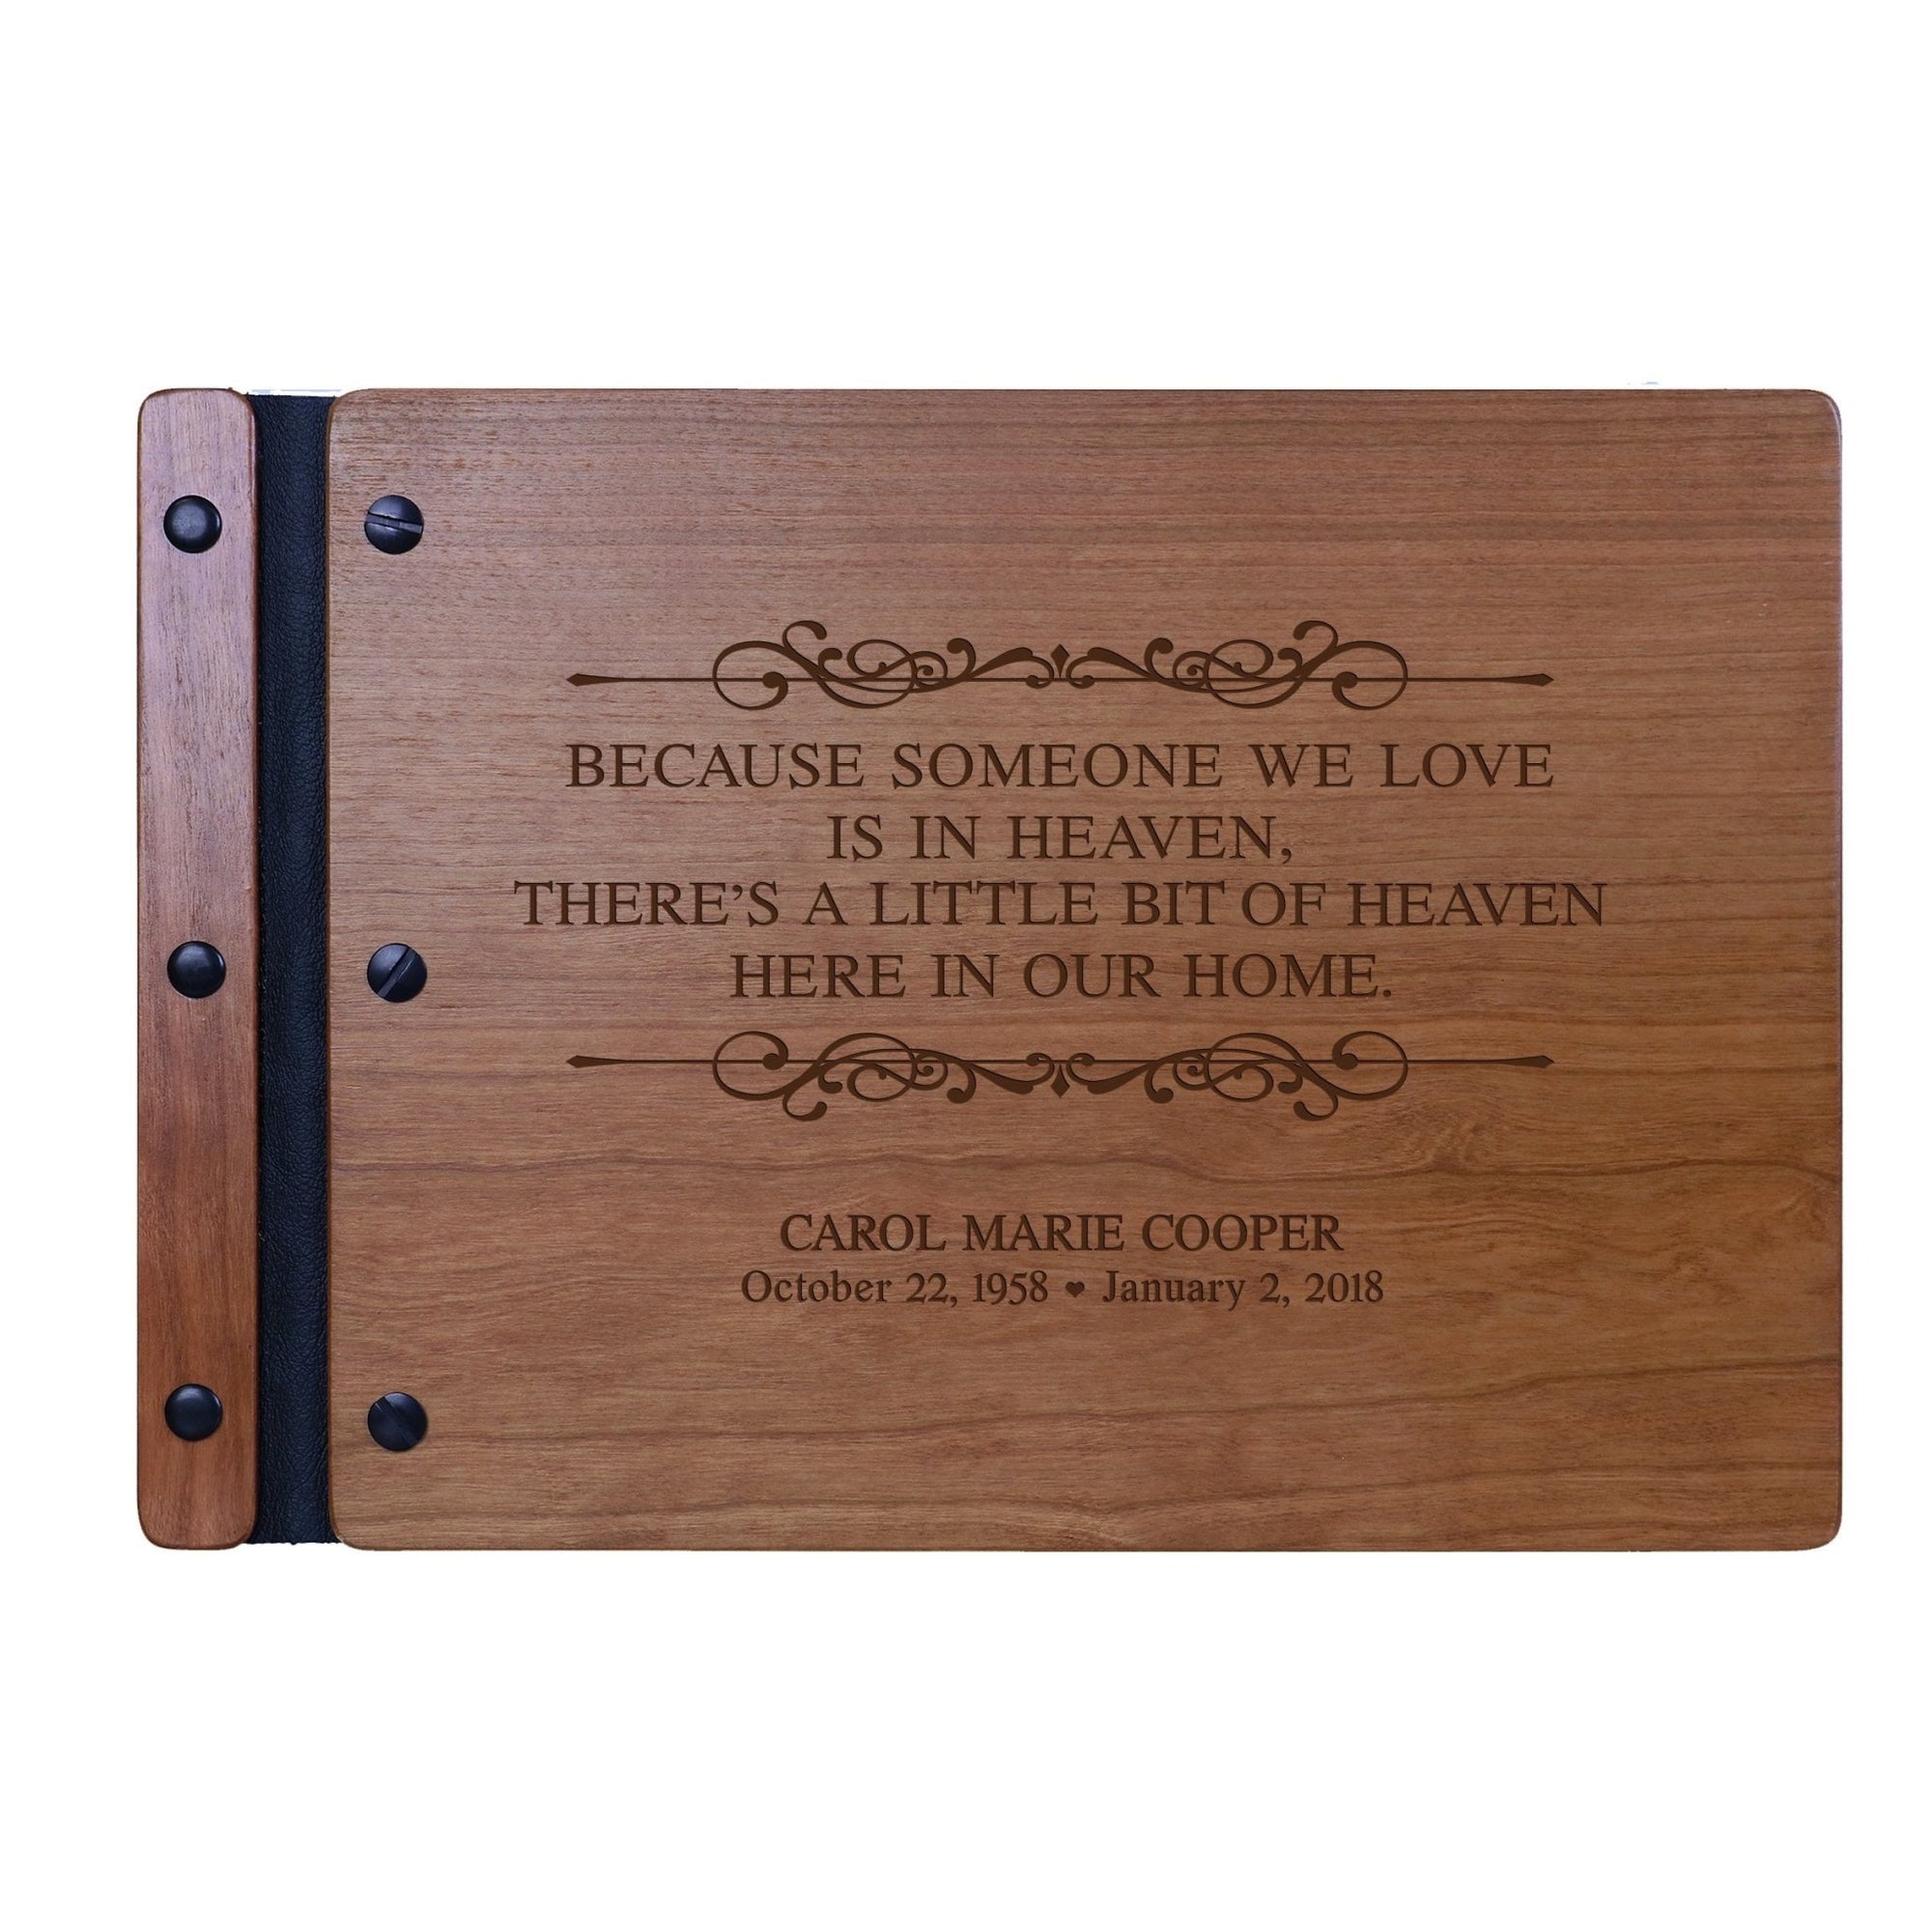 Personalized Wooden Funeral Guest Book For Memorial Service - In Memory Of A Life - LifeSong Milestones